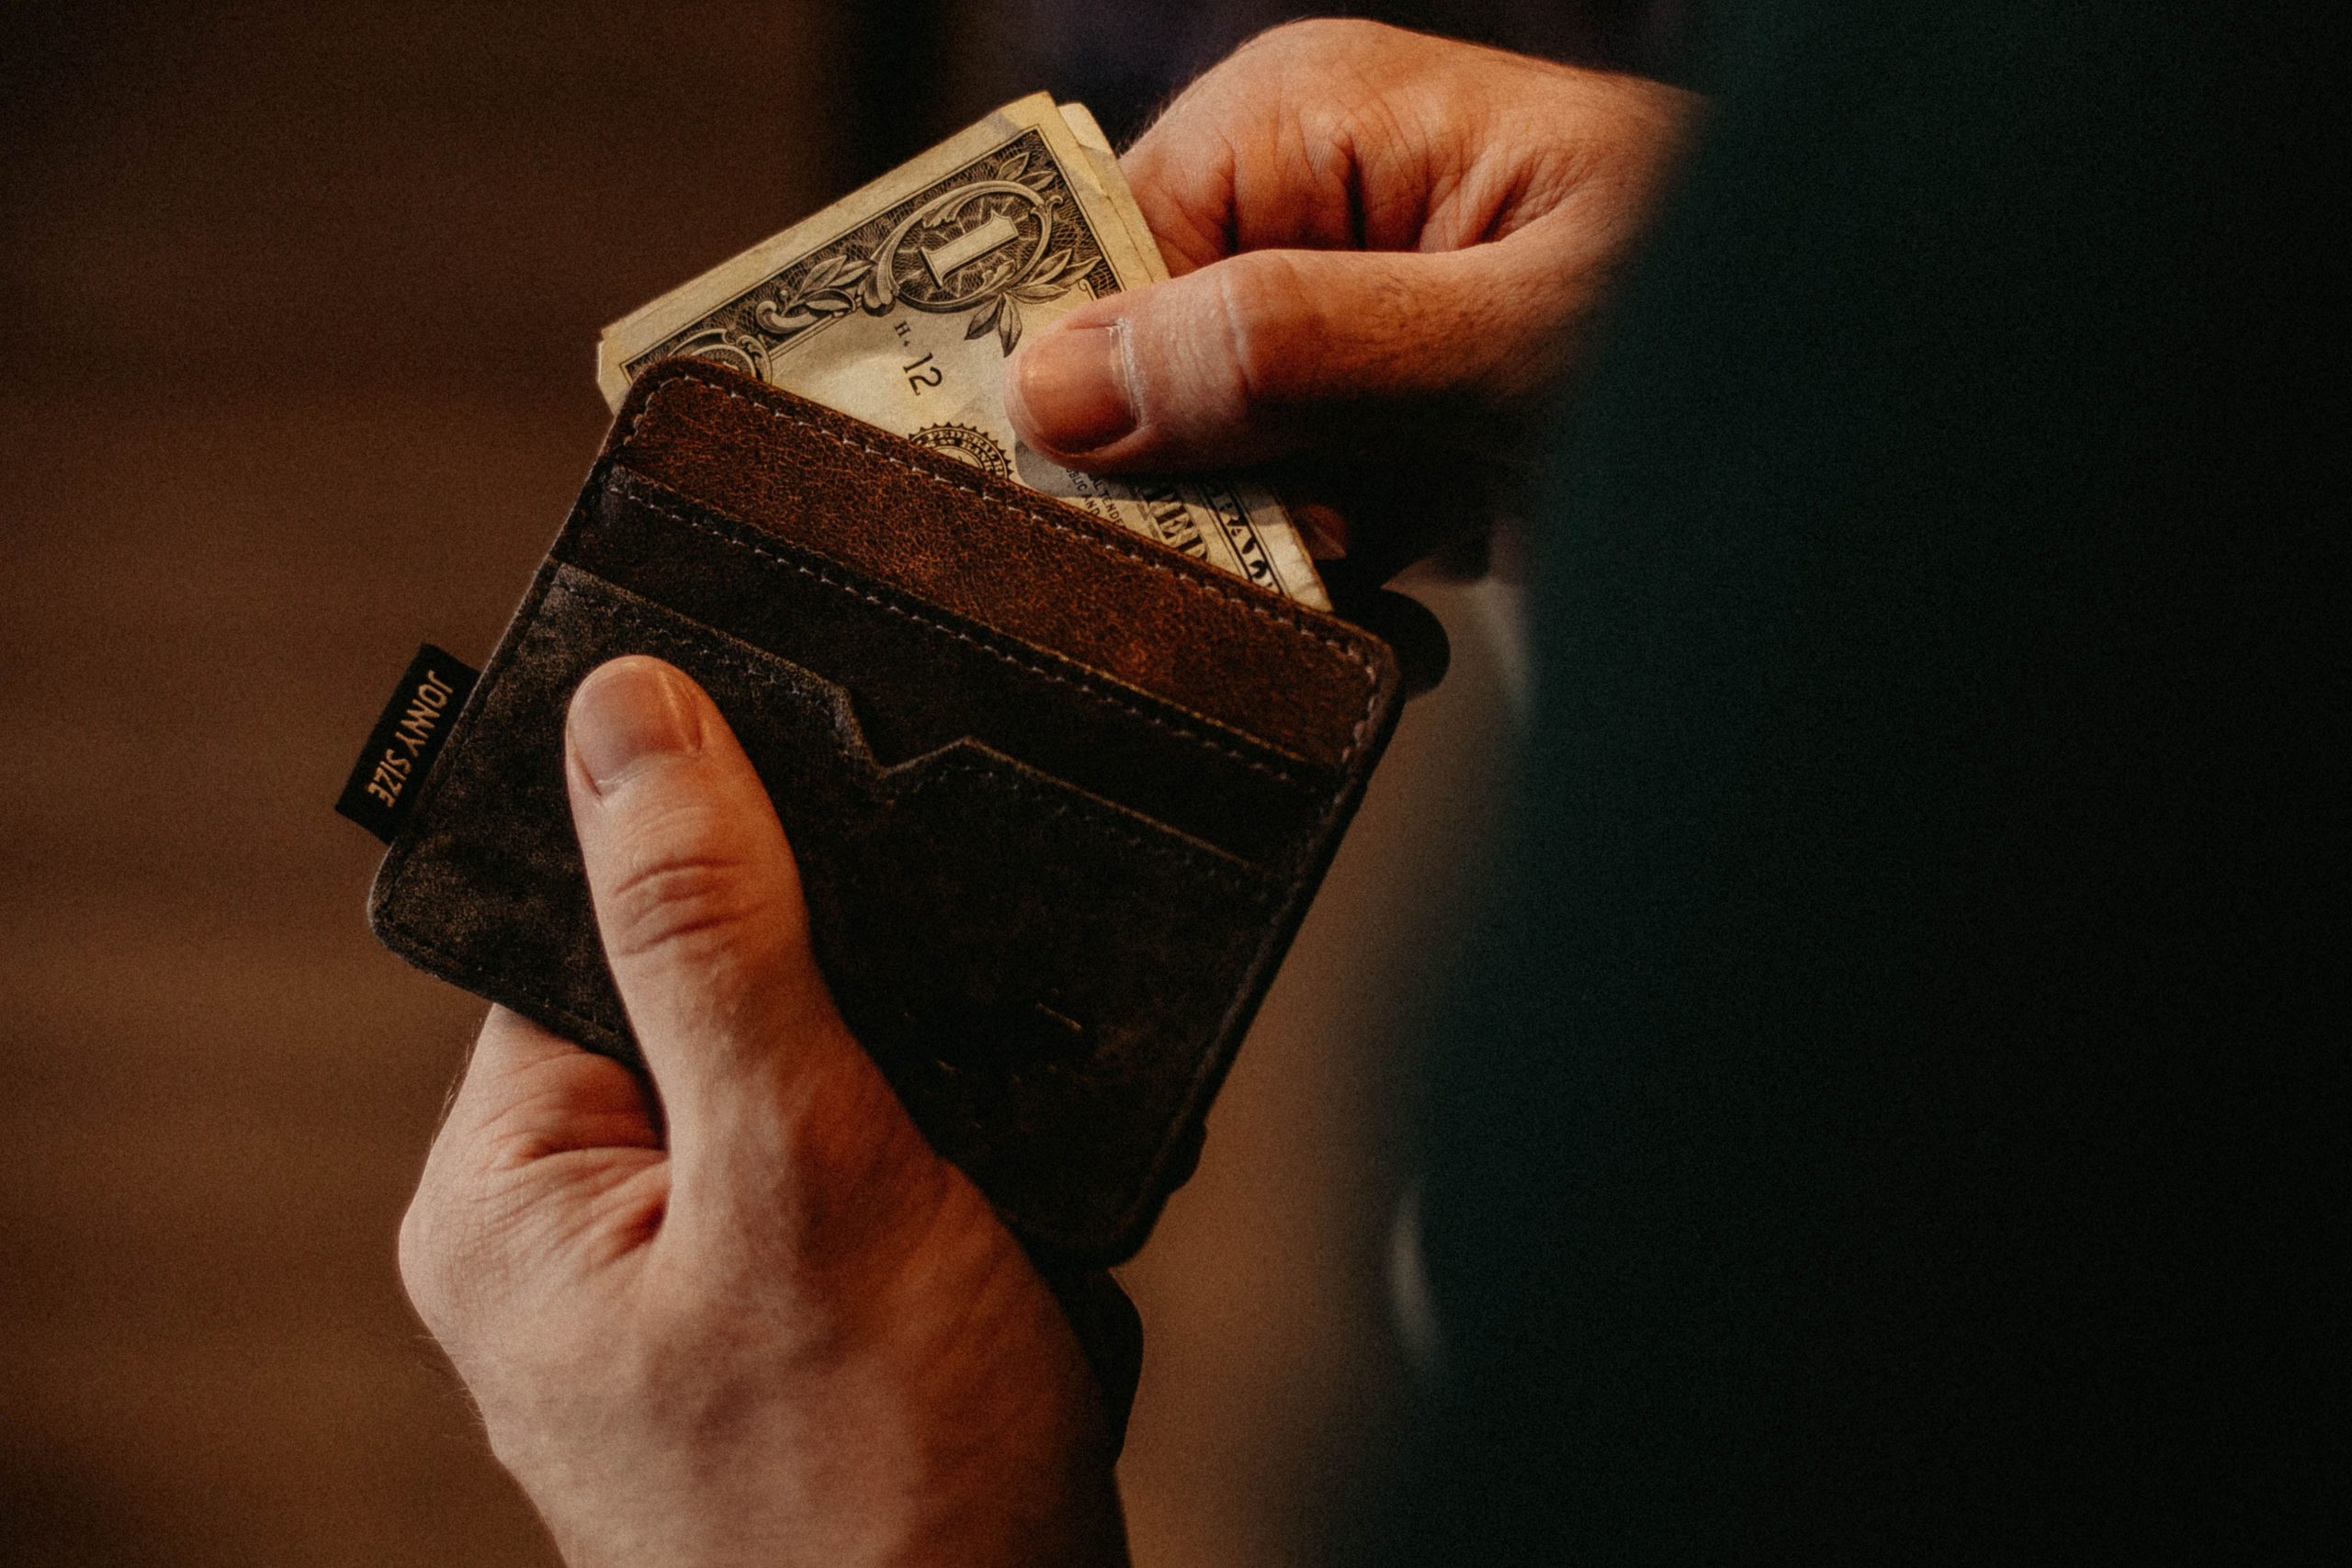 Man finds wallet lost 7 years ago, all contents intact